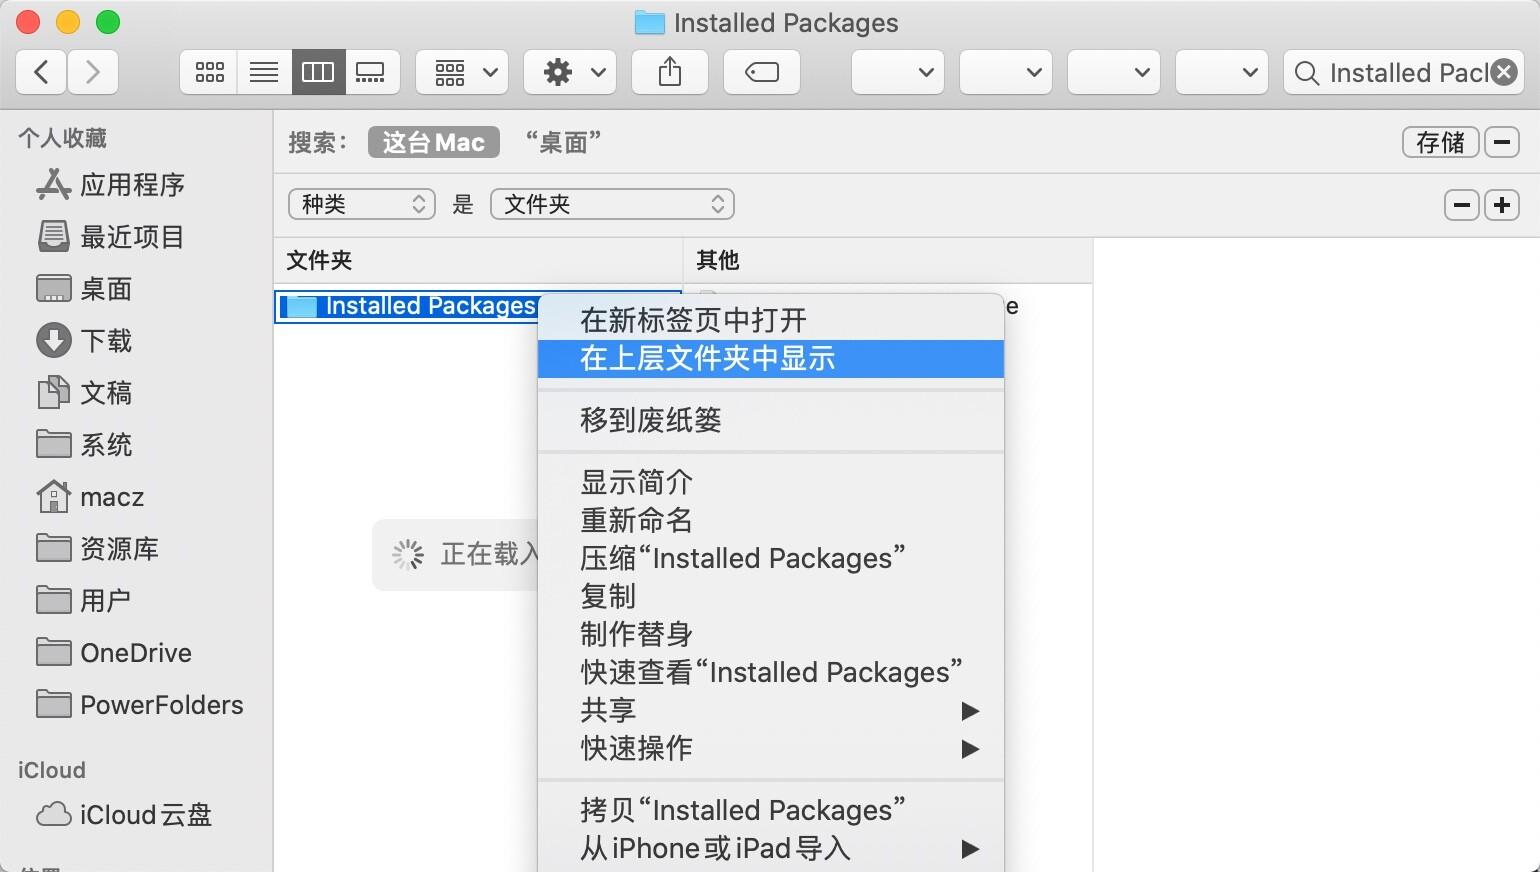 sublime text for mac(文本编辑器)